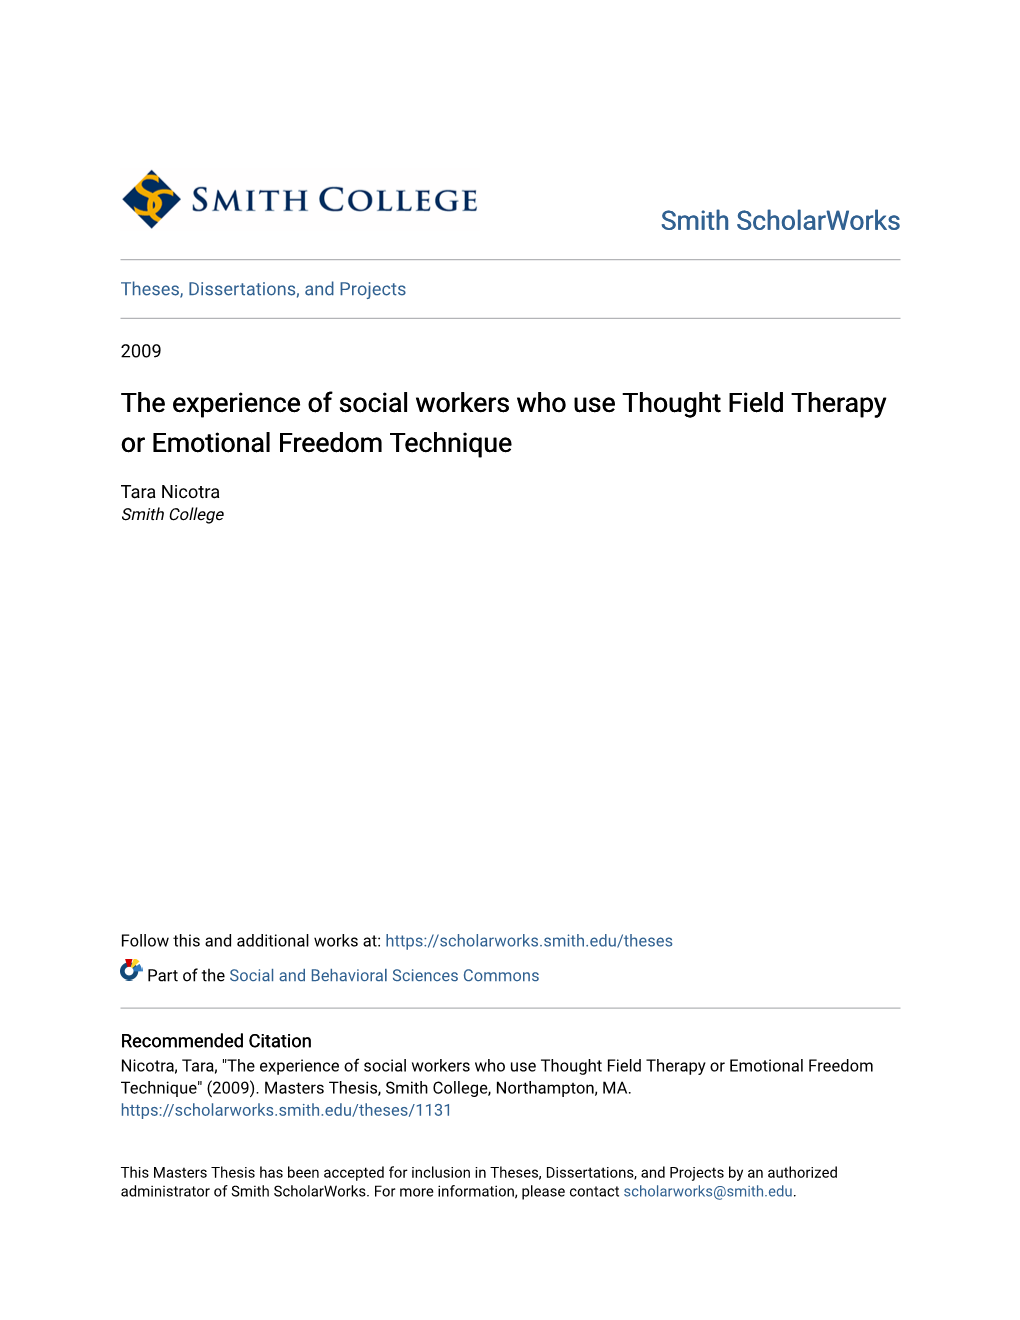 The Experience of Social Workers Who Use Thought Field Therapy Or Emotional Freedom Technique